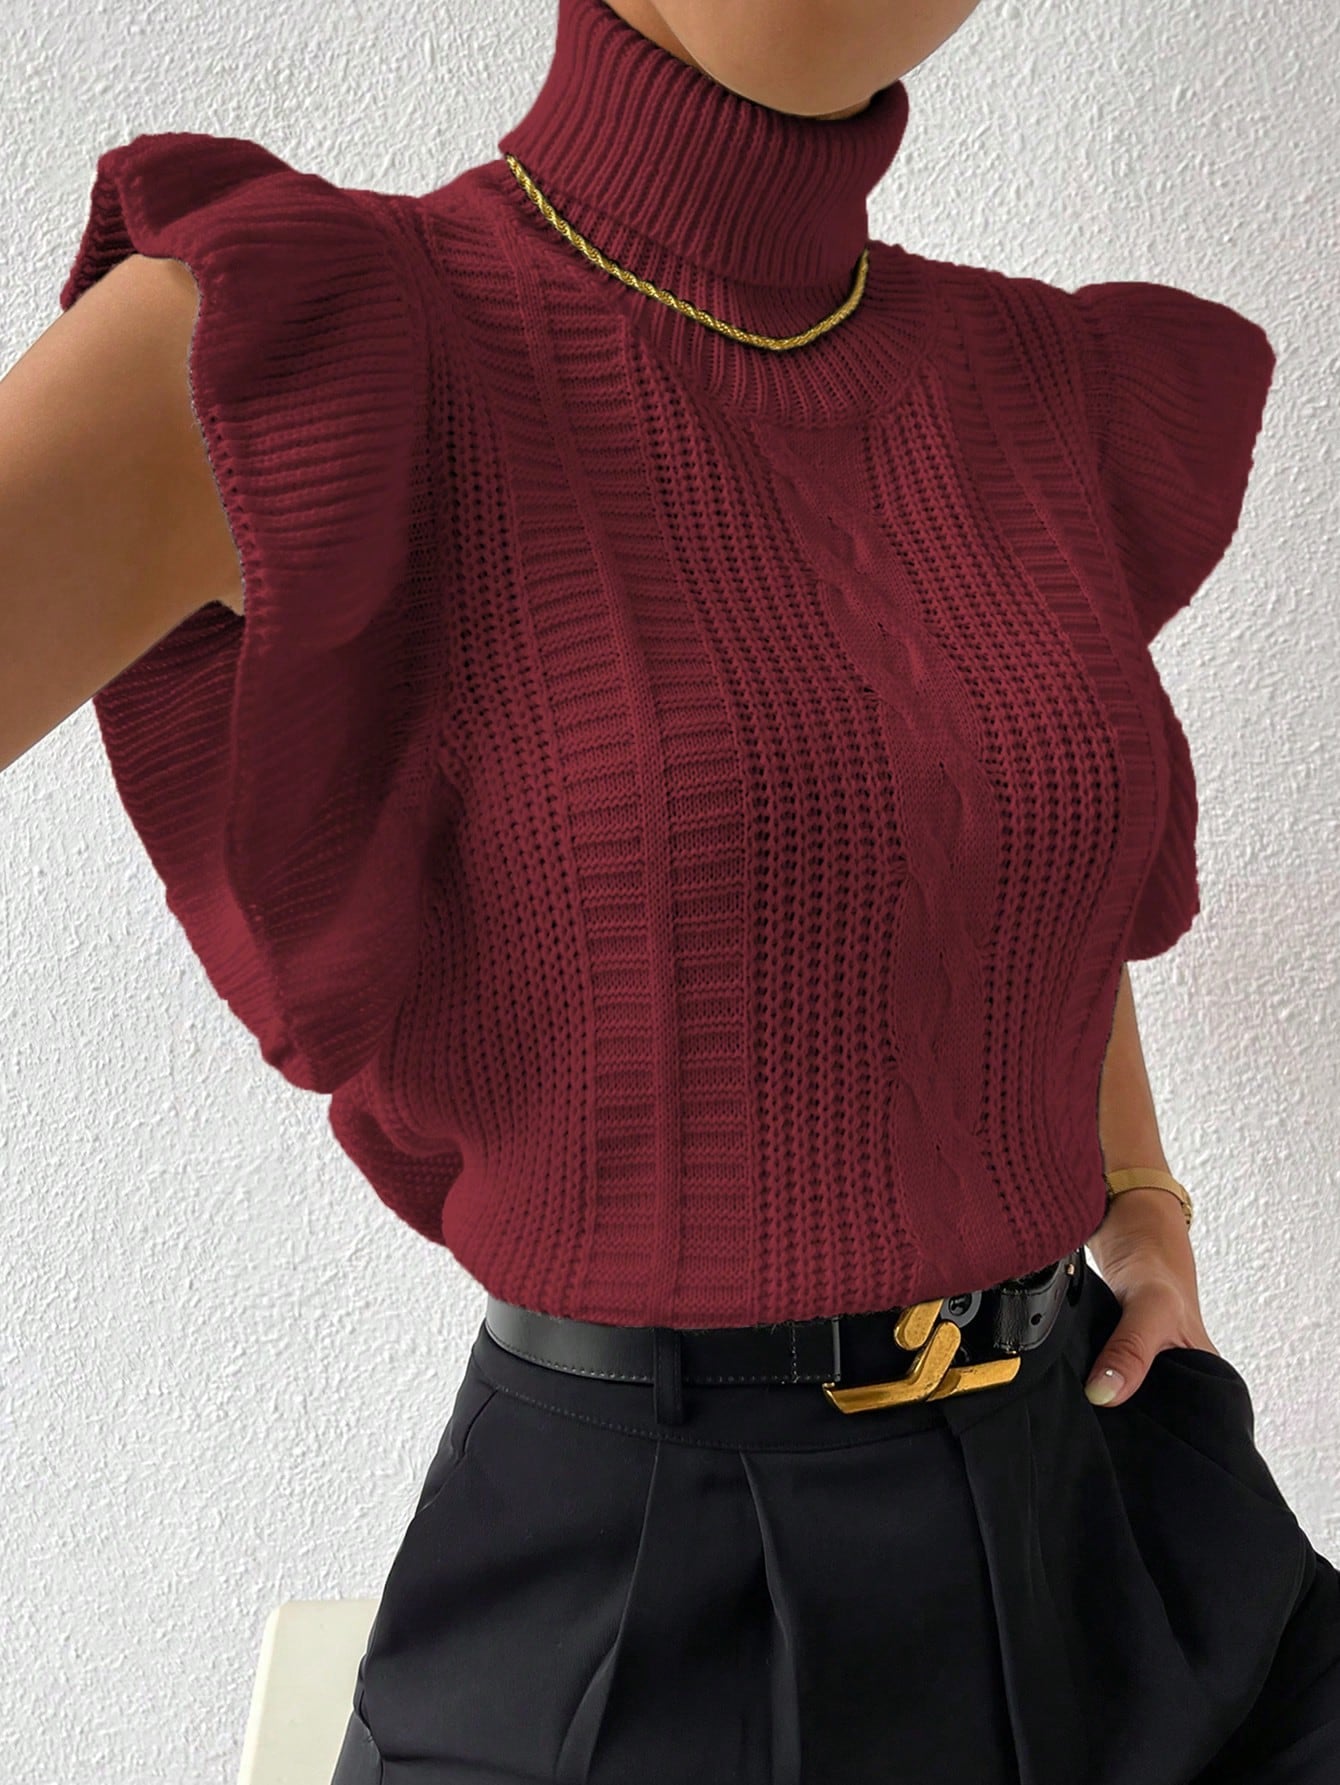 French Girl Turtle Neck Ruffle Trim Cable Knit Sweater Vest